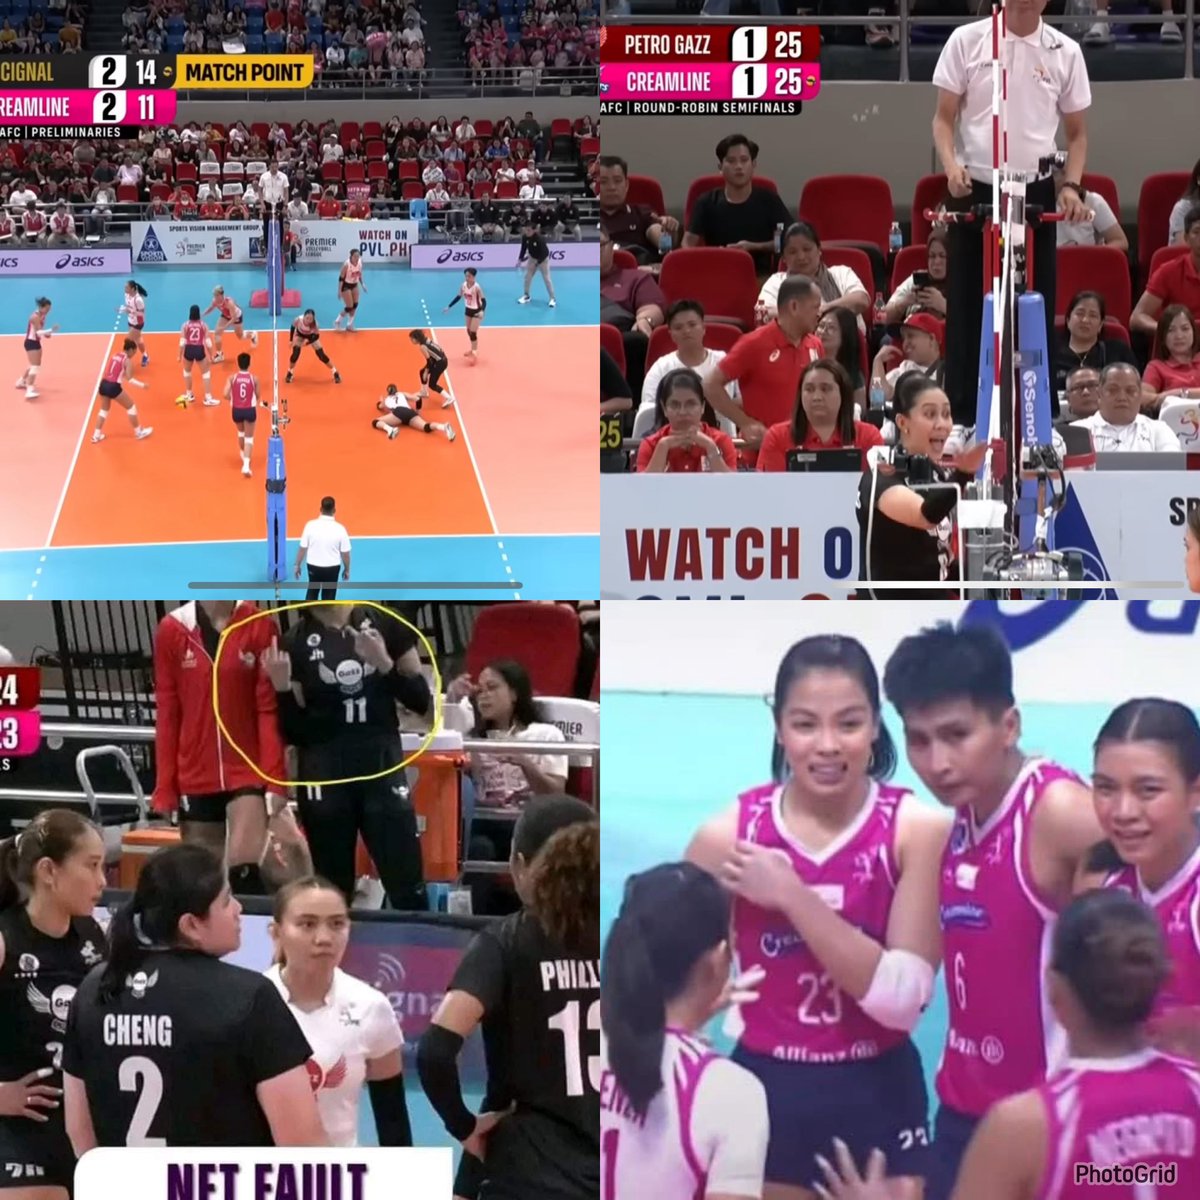 My Top 4 PVL AFC Moments 2024.

1. Creamline’s come from behind win against Cignal
2. Nang Aiza Maizo’s sigaw moment
3. Marian Buitre pakyu moment
4. Kyle Negrito setting moments

#PVL2024